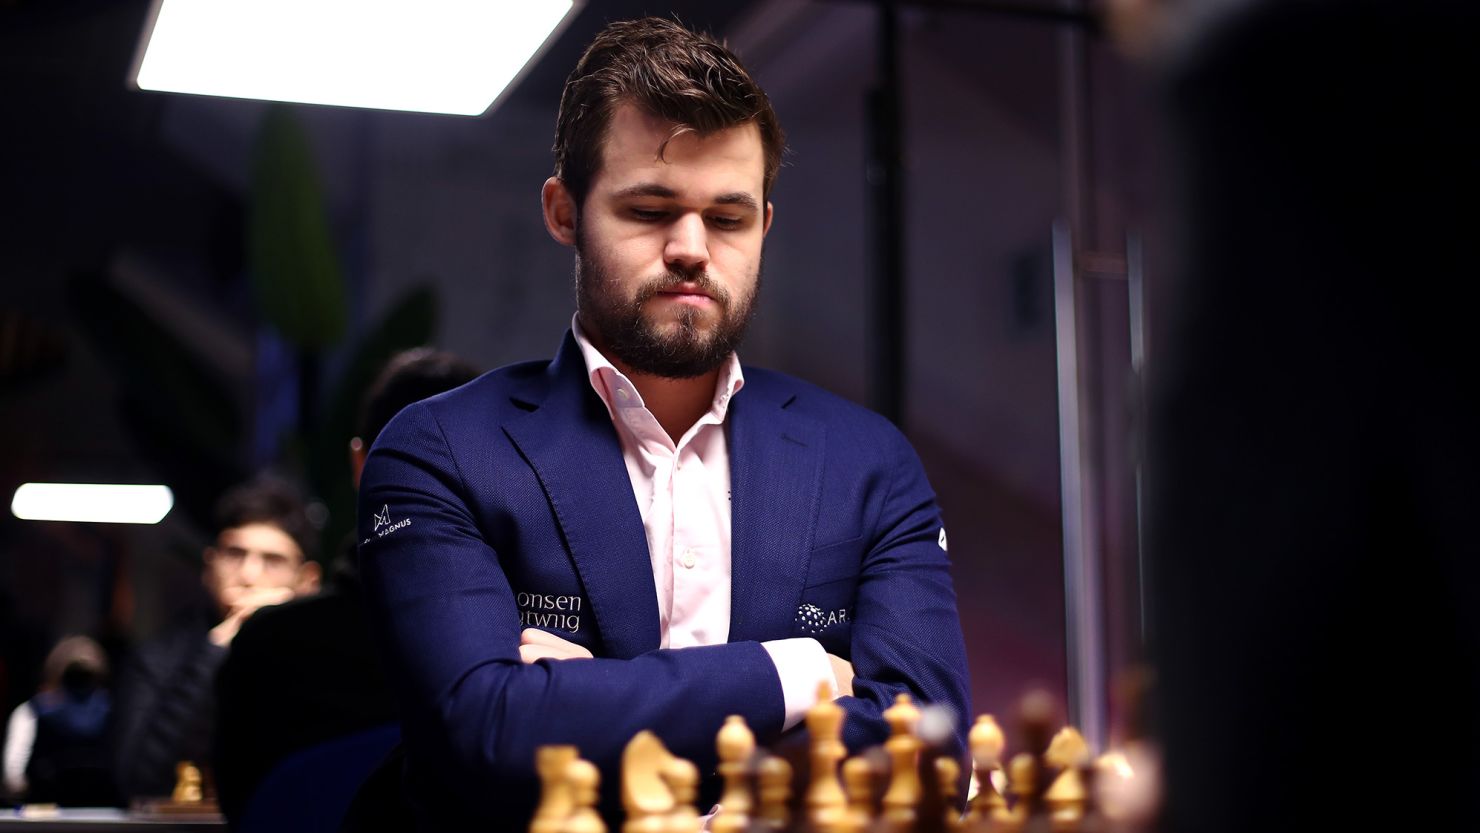 World Chess Champion Magnus Carlsen begins match with black against Anish  Giri in UN-backed campaign targeting racial discrimination-Sports News ,  Firstpost